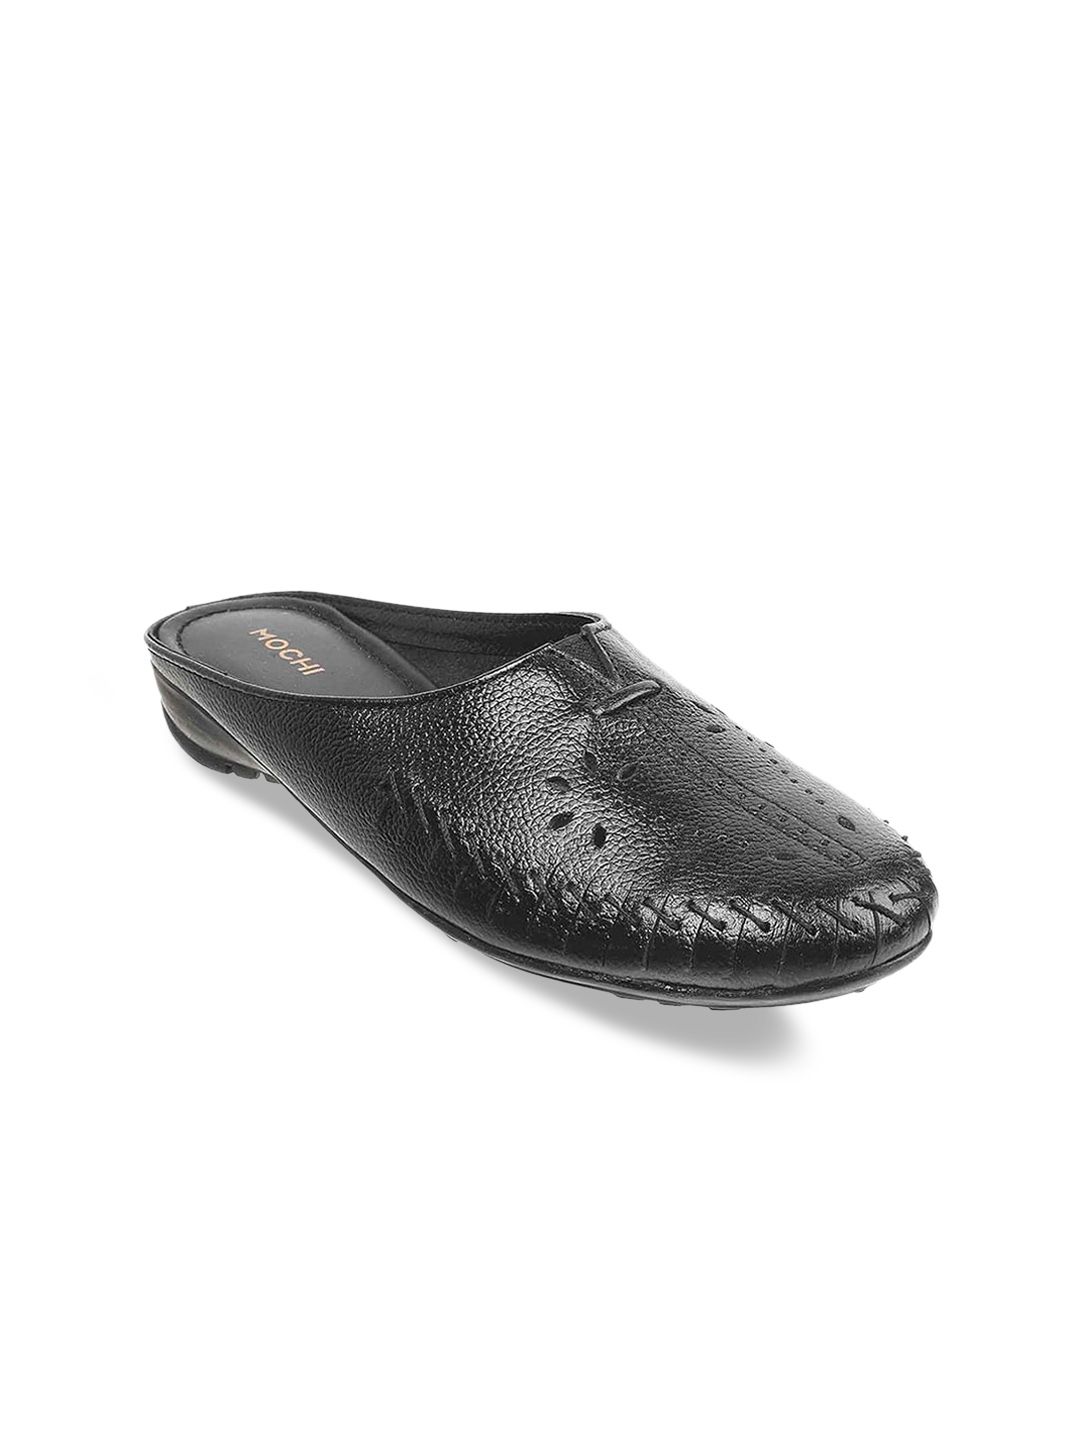 Mochi Women Black Mules with Laser Cuts Flats Price in India